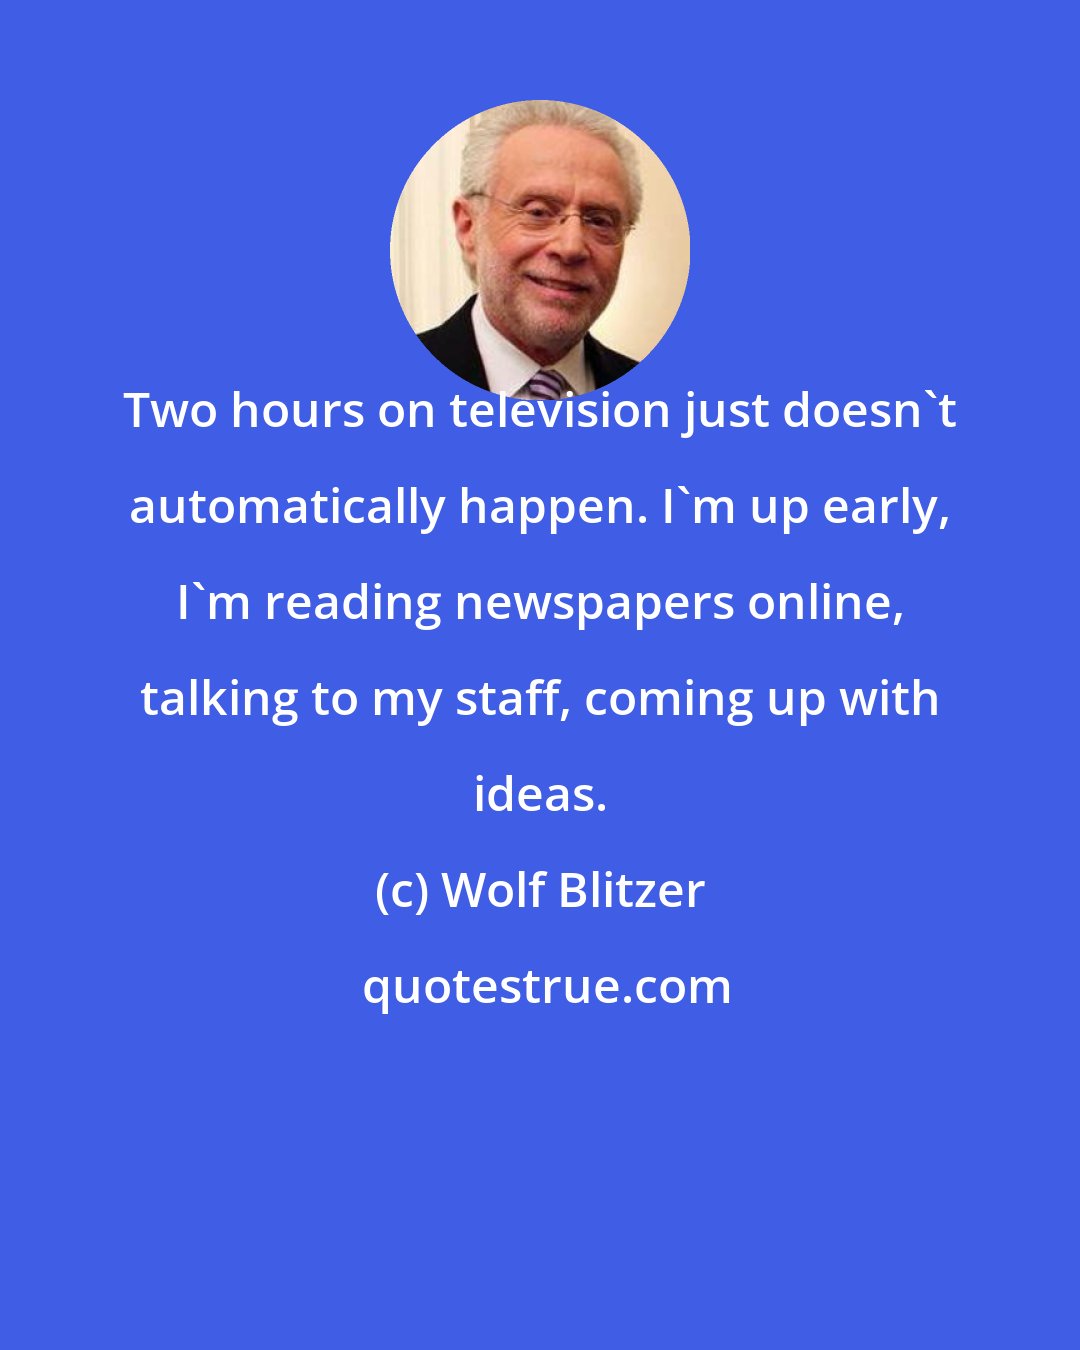 Wolf Blitzer: Two hours on television just doesn't automatically happen. I'm up early, I'm reading newspapers online, talking to my staff, coming up with ideas.